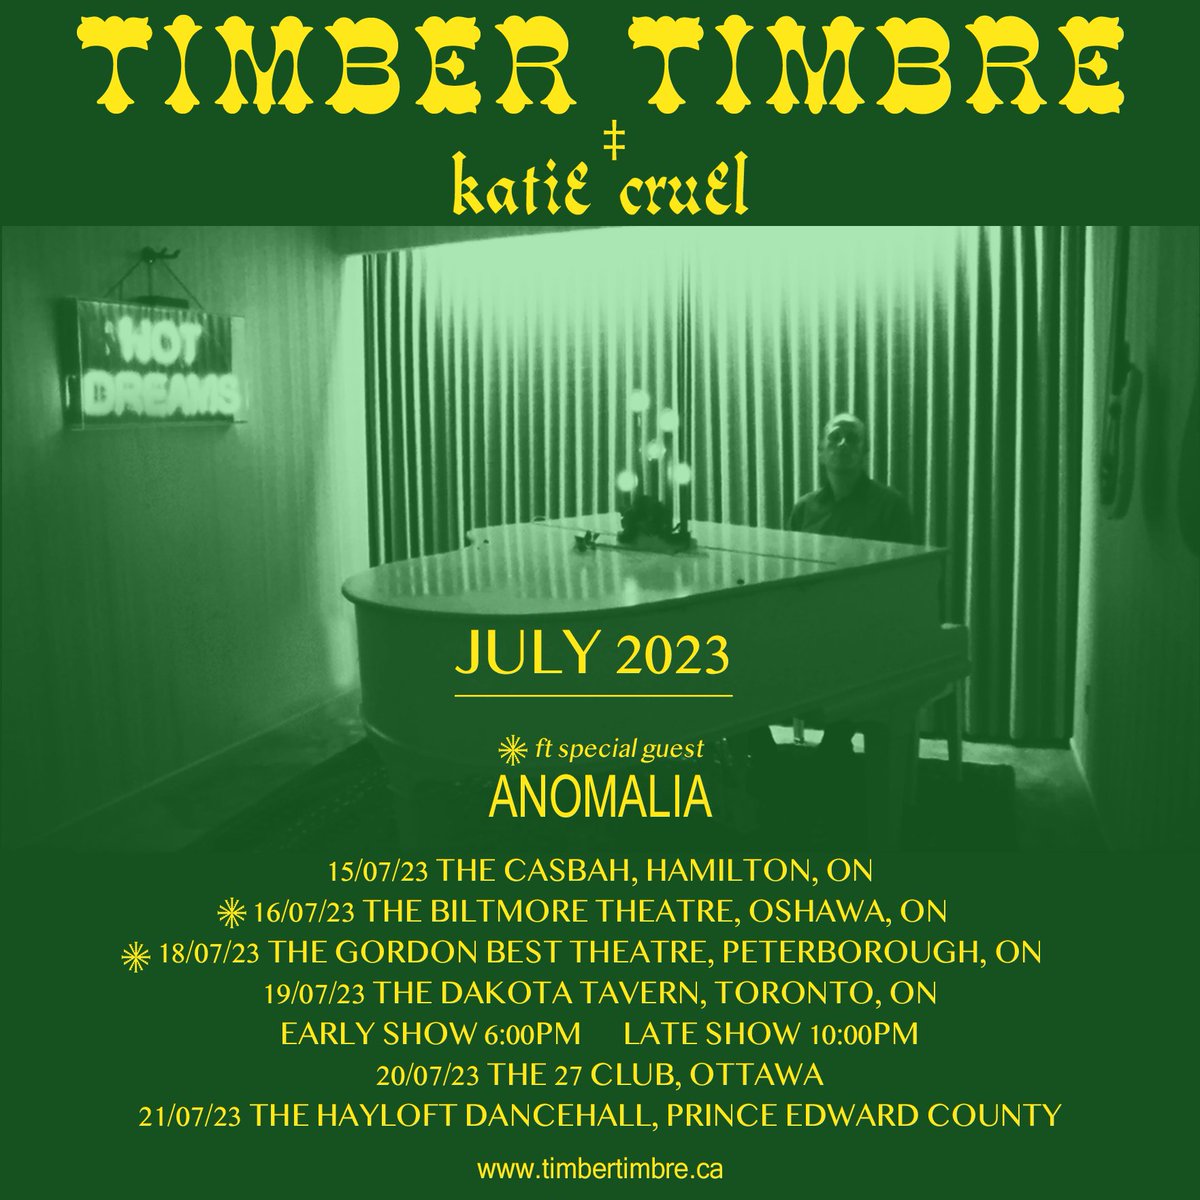 💠Get your paper calendars out, it's show time 💠 
KC will be joining TT in July. 
.
Get your tickets, these are very small venues. Let's get greazy.
.
#katiecruel #timbertimbre #ontario #wombcroon #hagrock #newmusic 
.
@timber_timbre_ @nicemarmotpr @eekprod